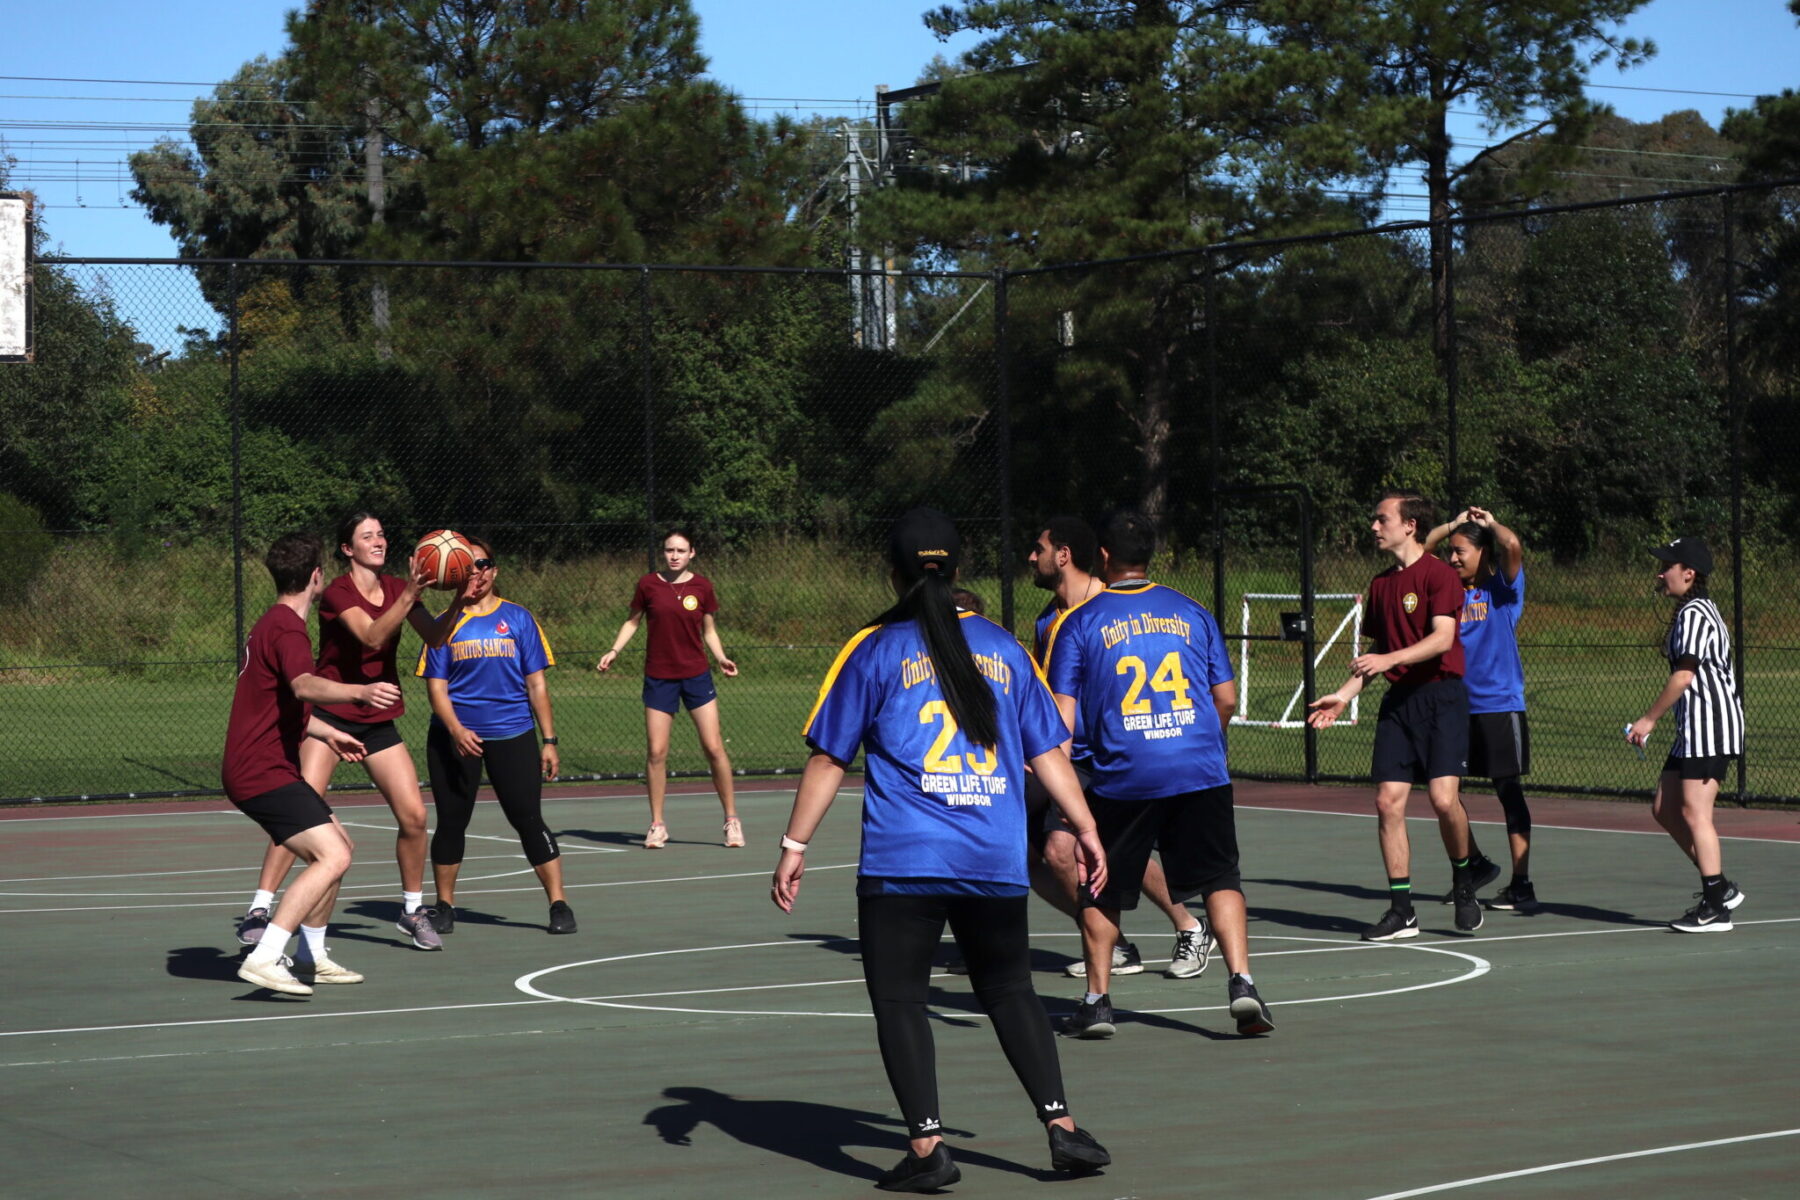 LIFTED-Sports-Day-May-2021-01-scaled-1. Campion College Australia.